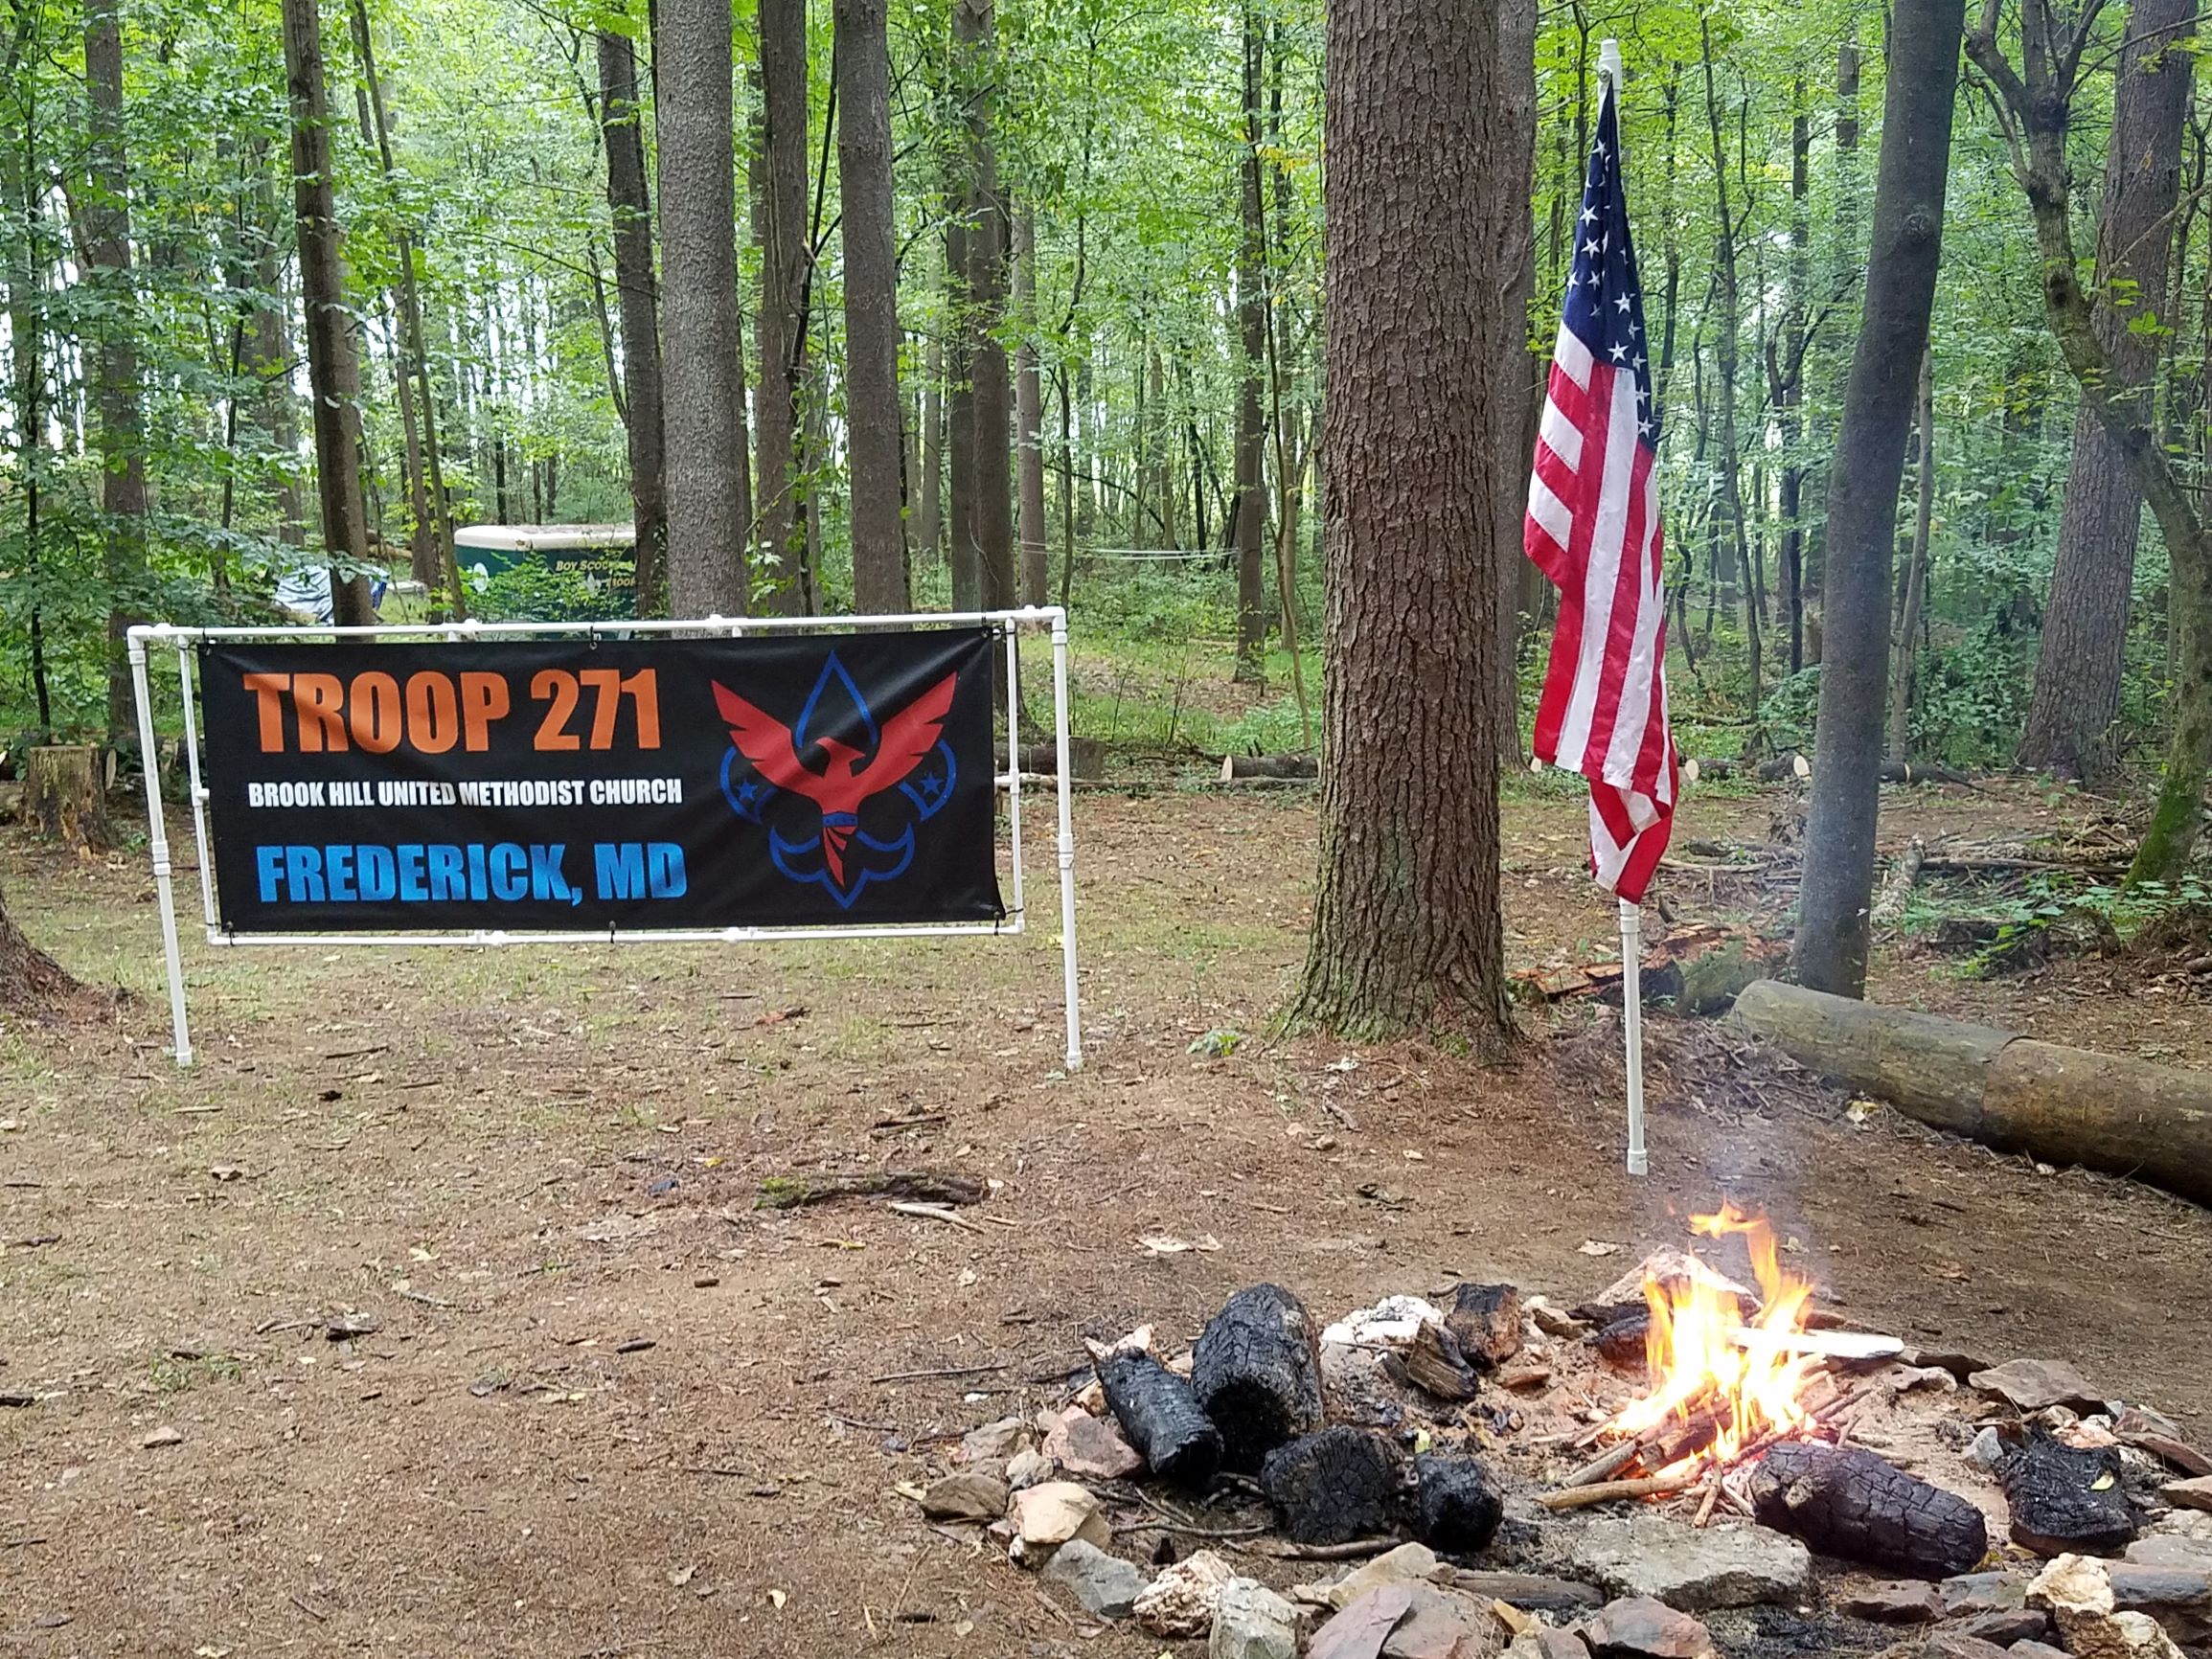 Boy Scout Camping trip - banner, flag, fire